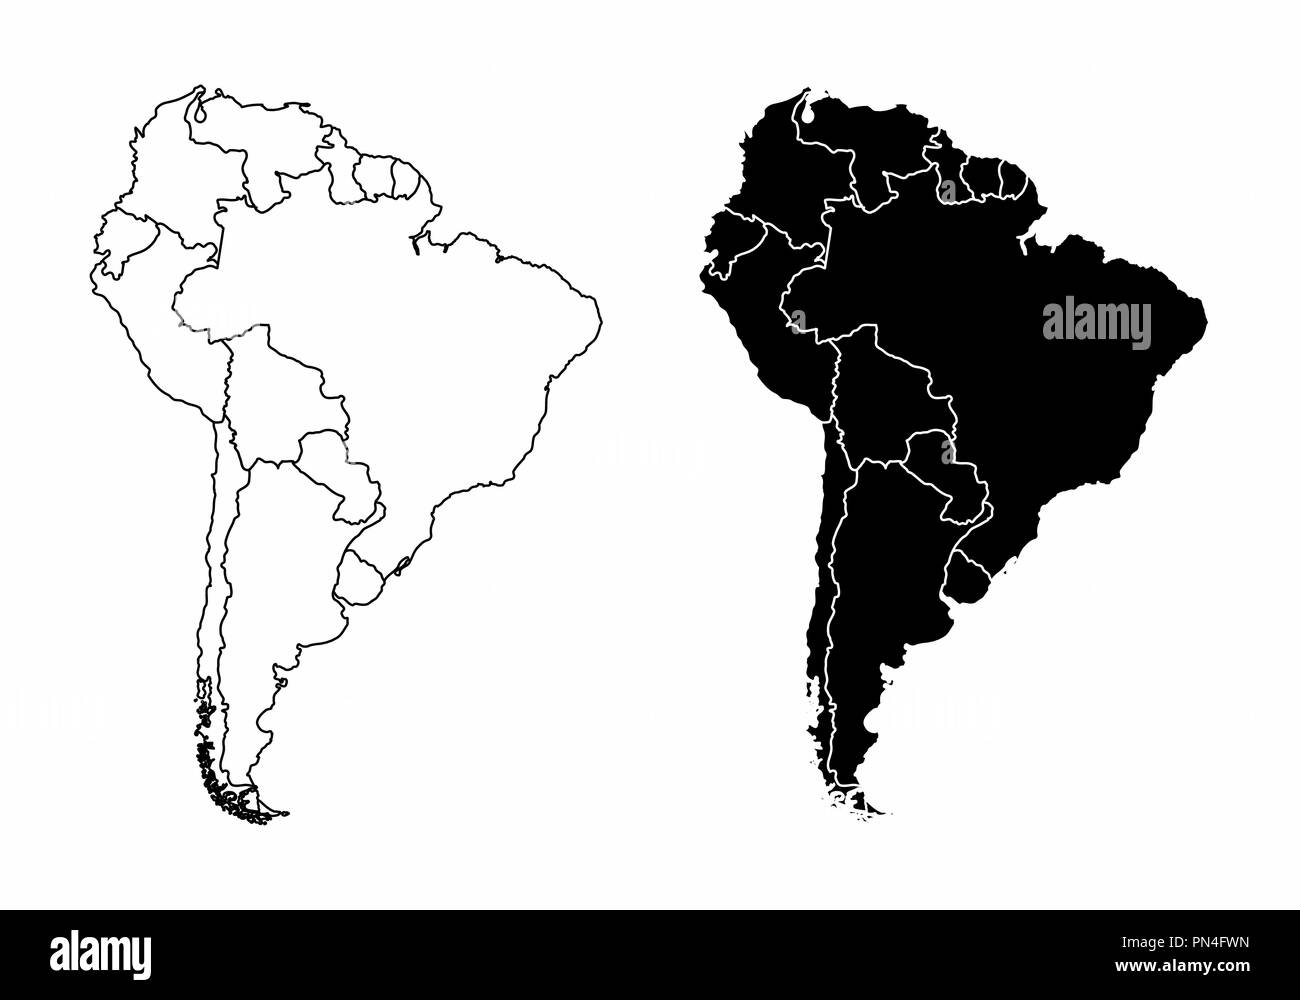 Simplified maps of the south america with countries boundaries. Black and white outlines. Stock Vector